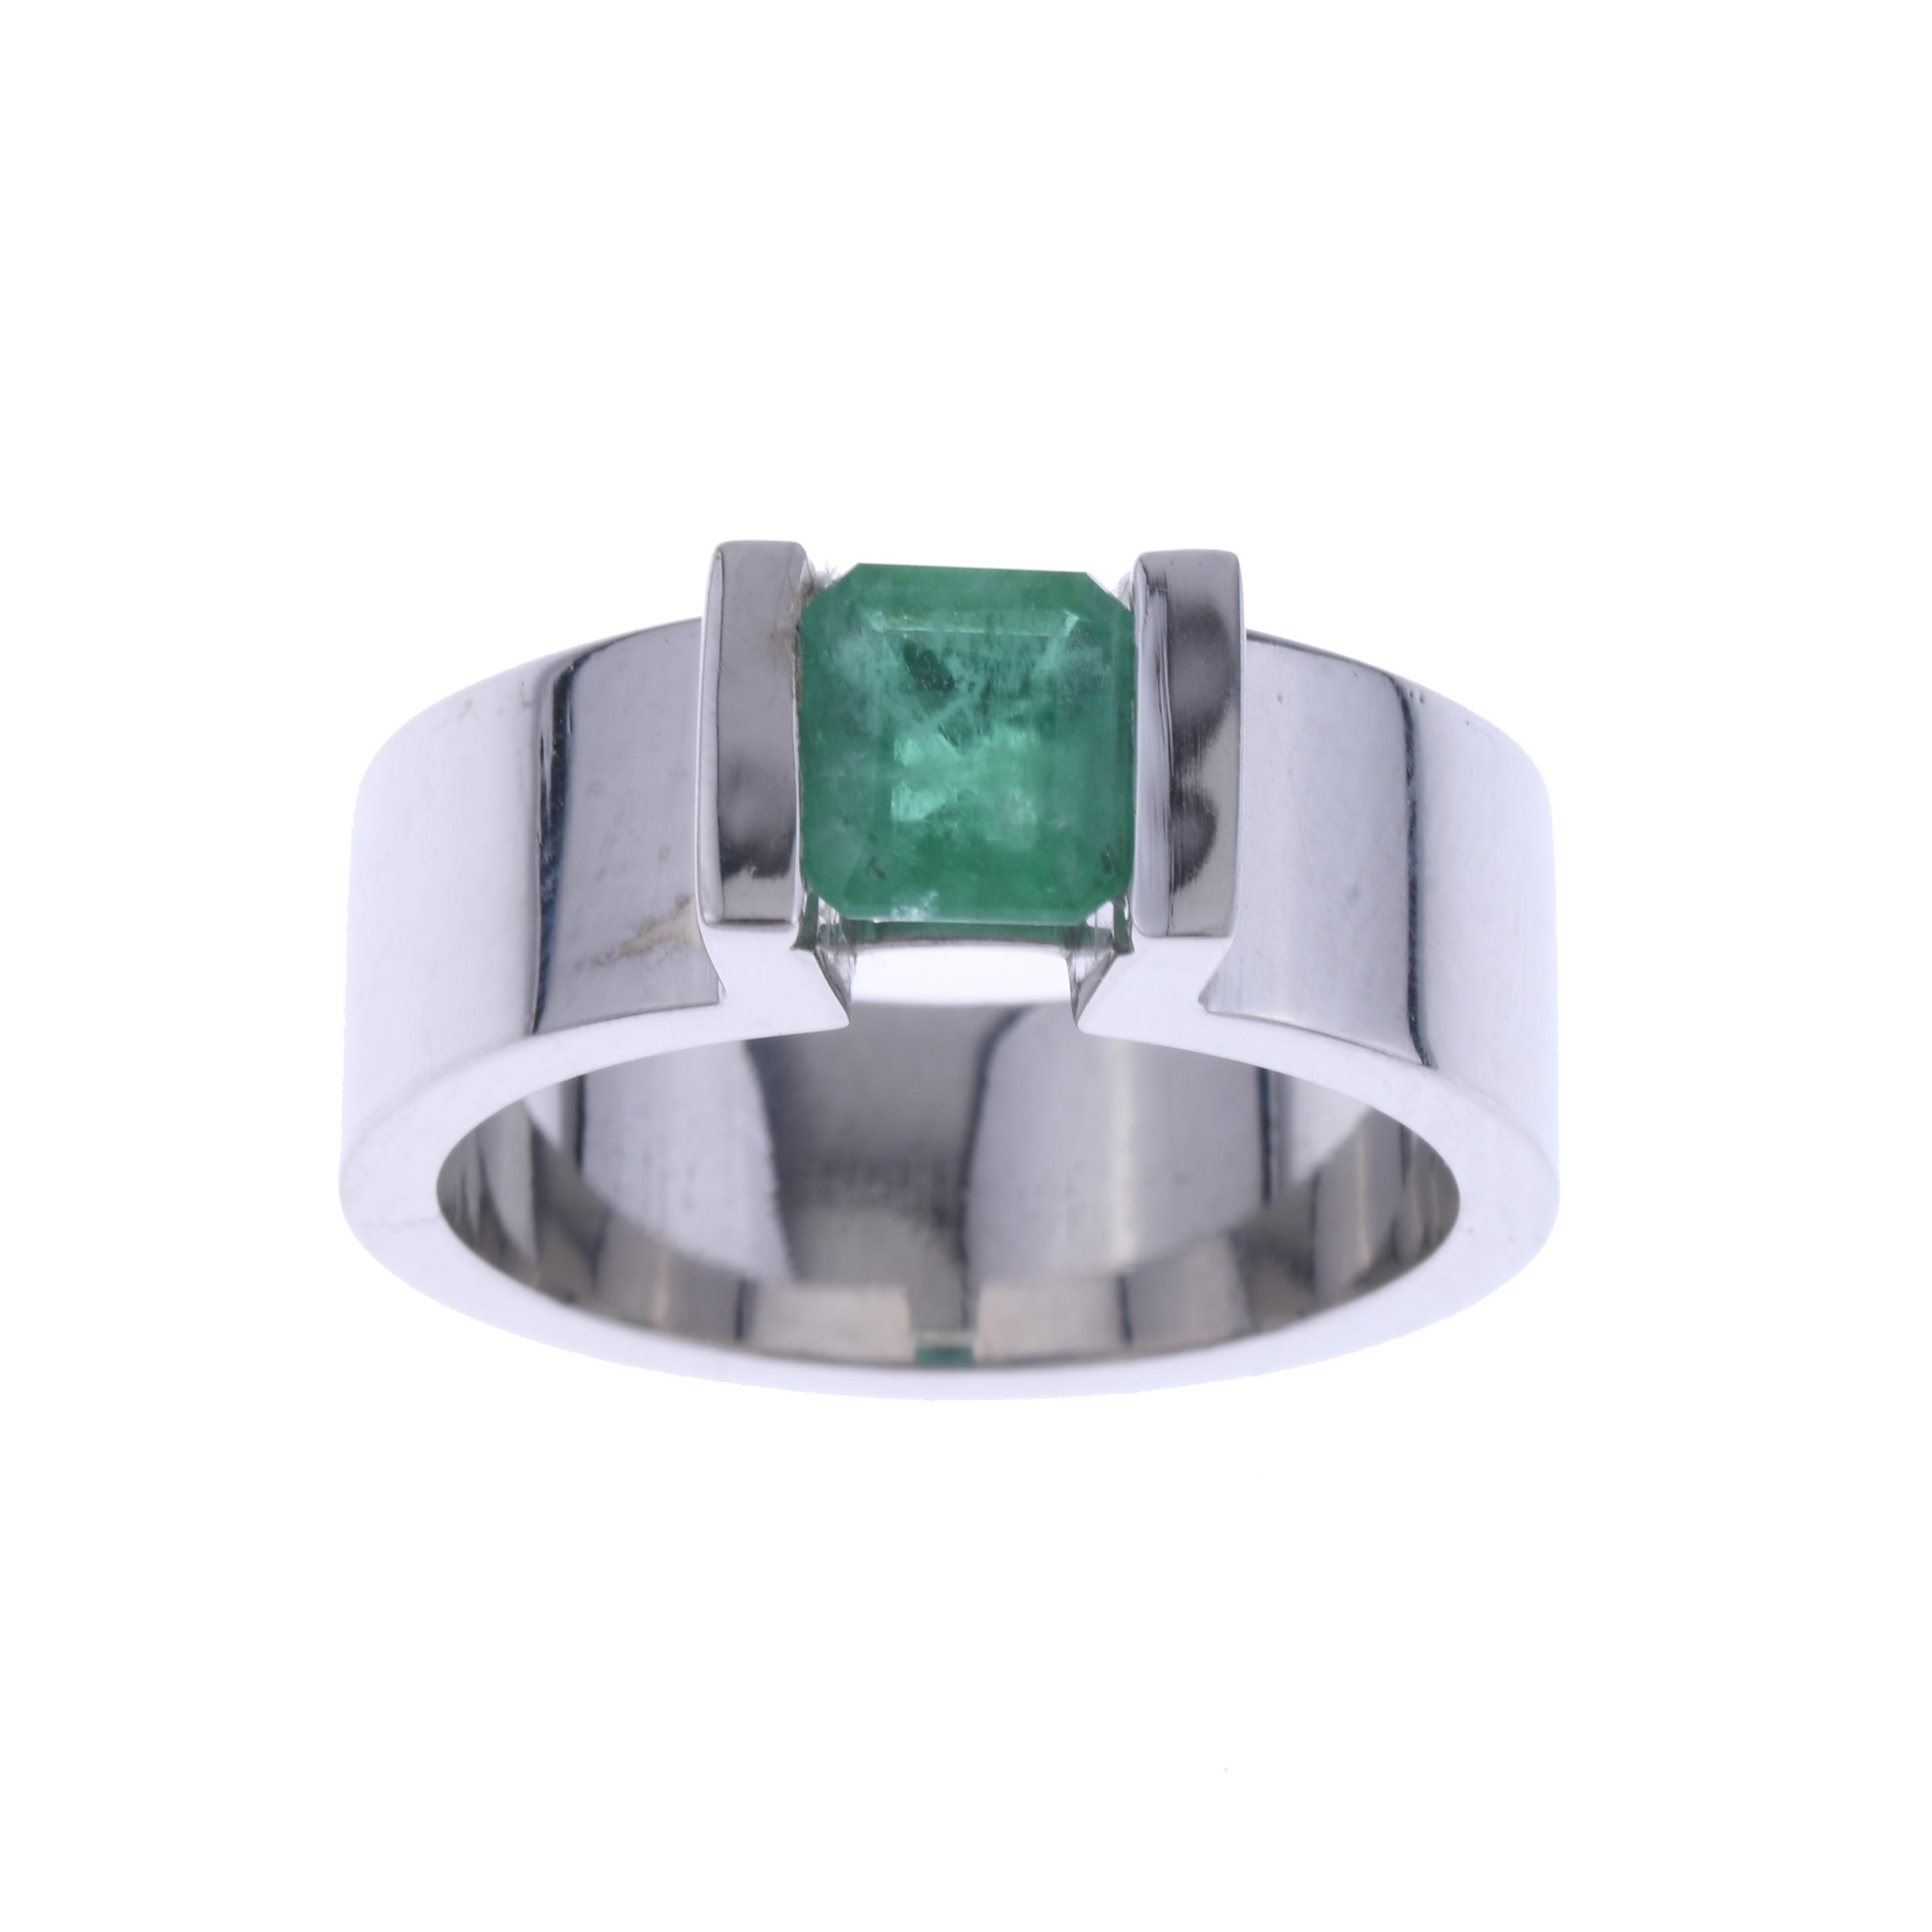 SOLITAIRE RING WITH AN EMERALD.